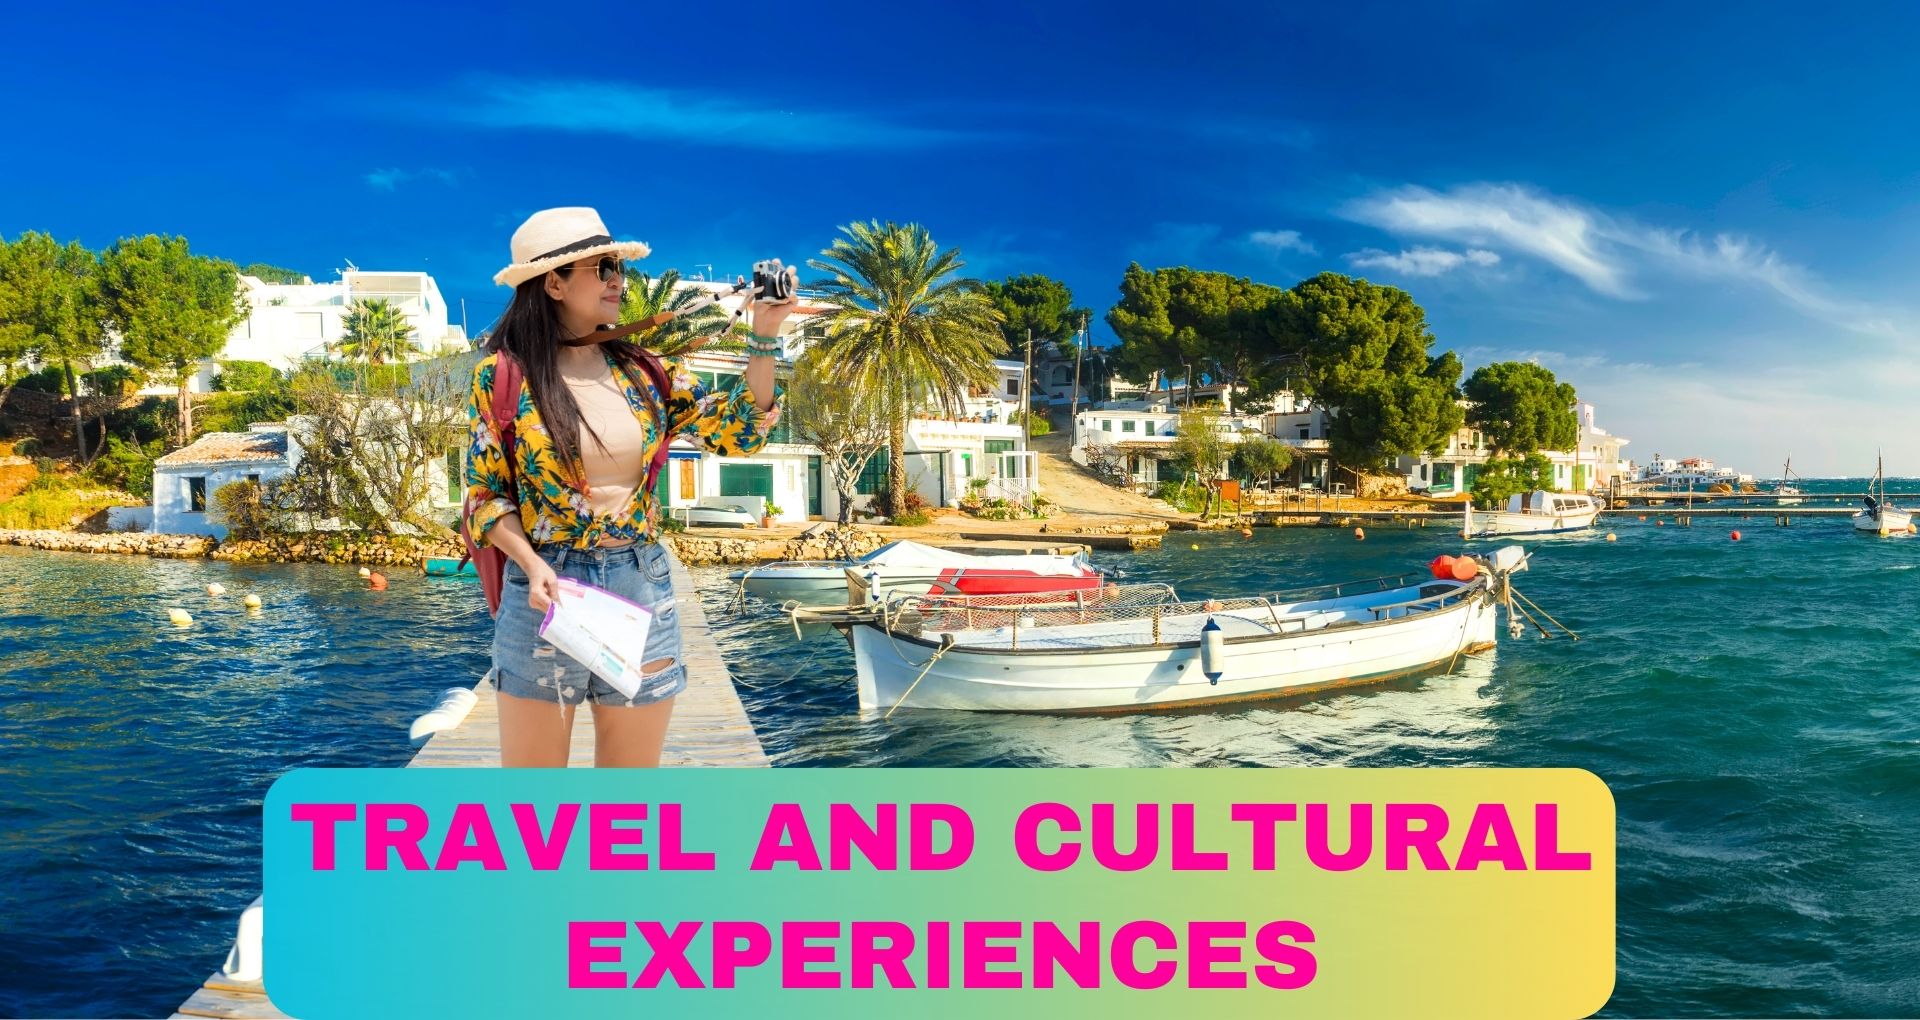 Travel and cultural experiences